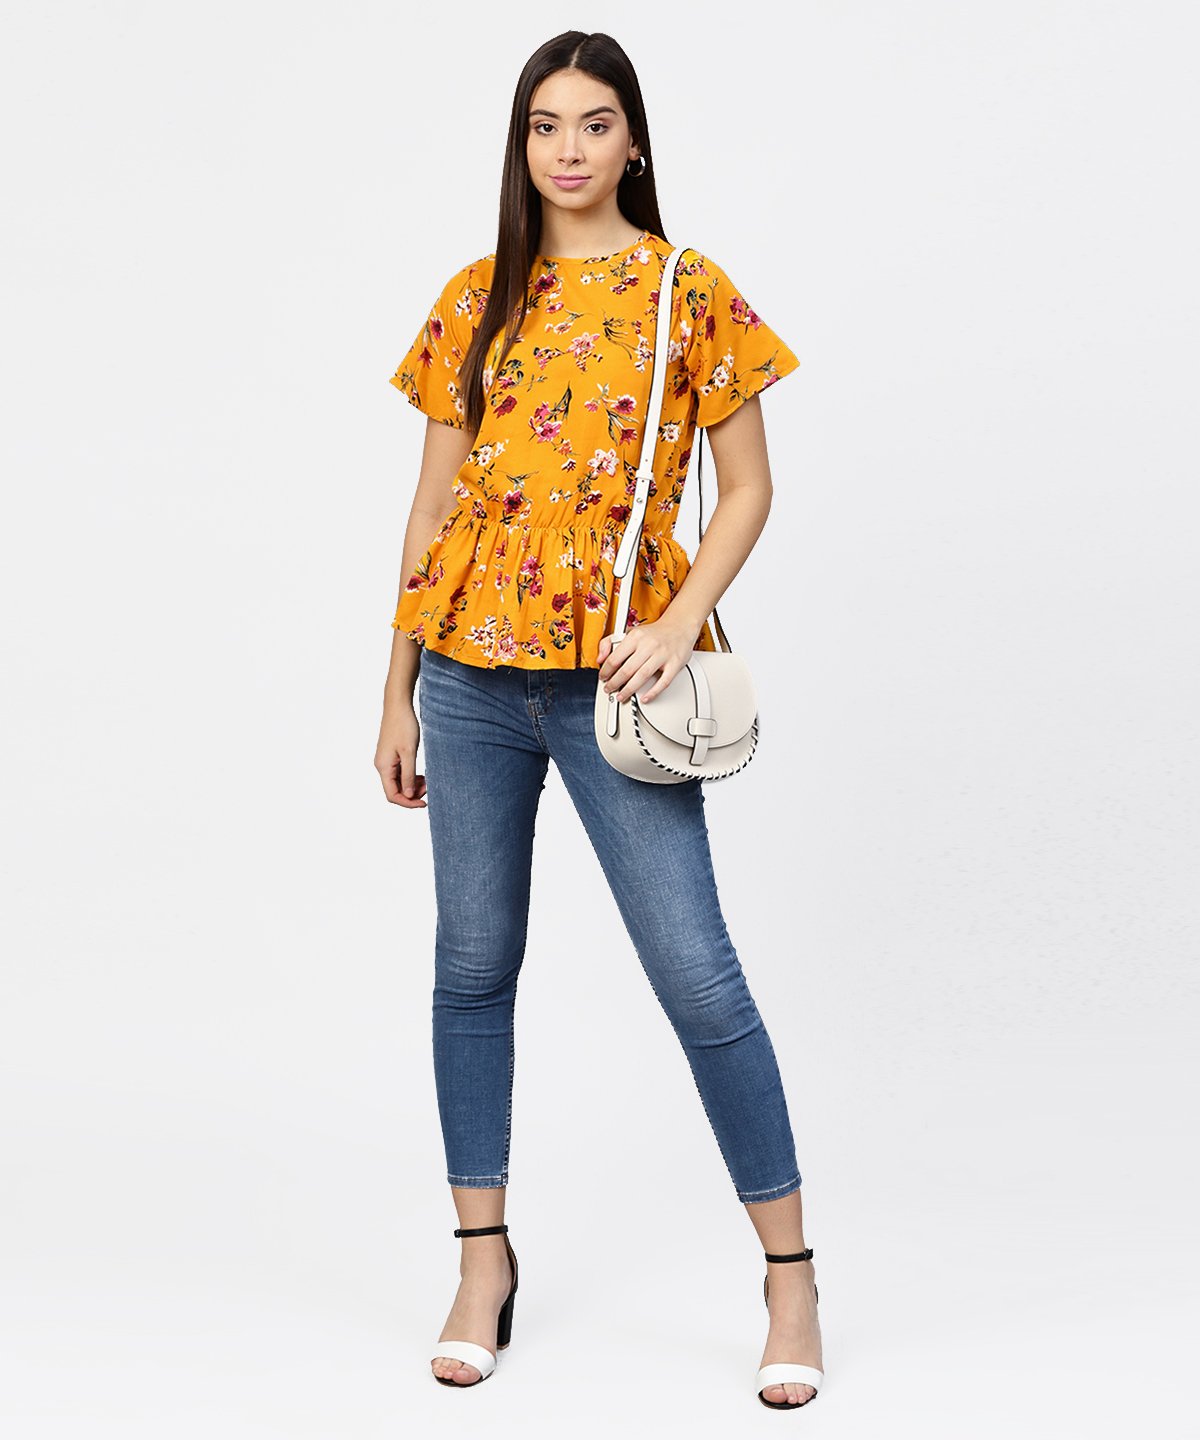 Women's Yellow Printed Short Sleeve With A Gathered Peplum Style Top - Nayo Clothing